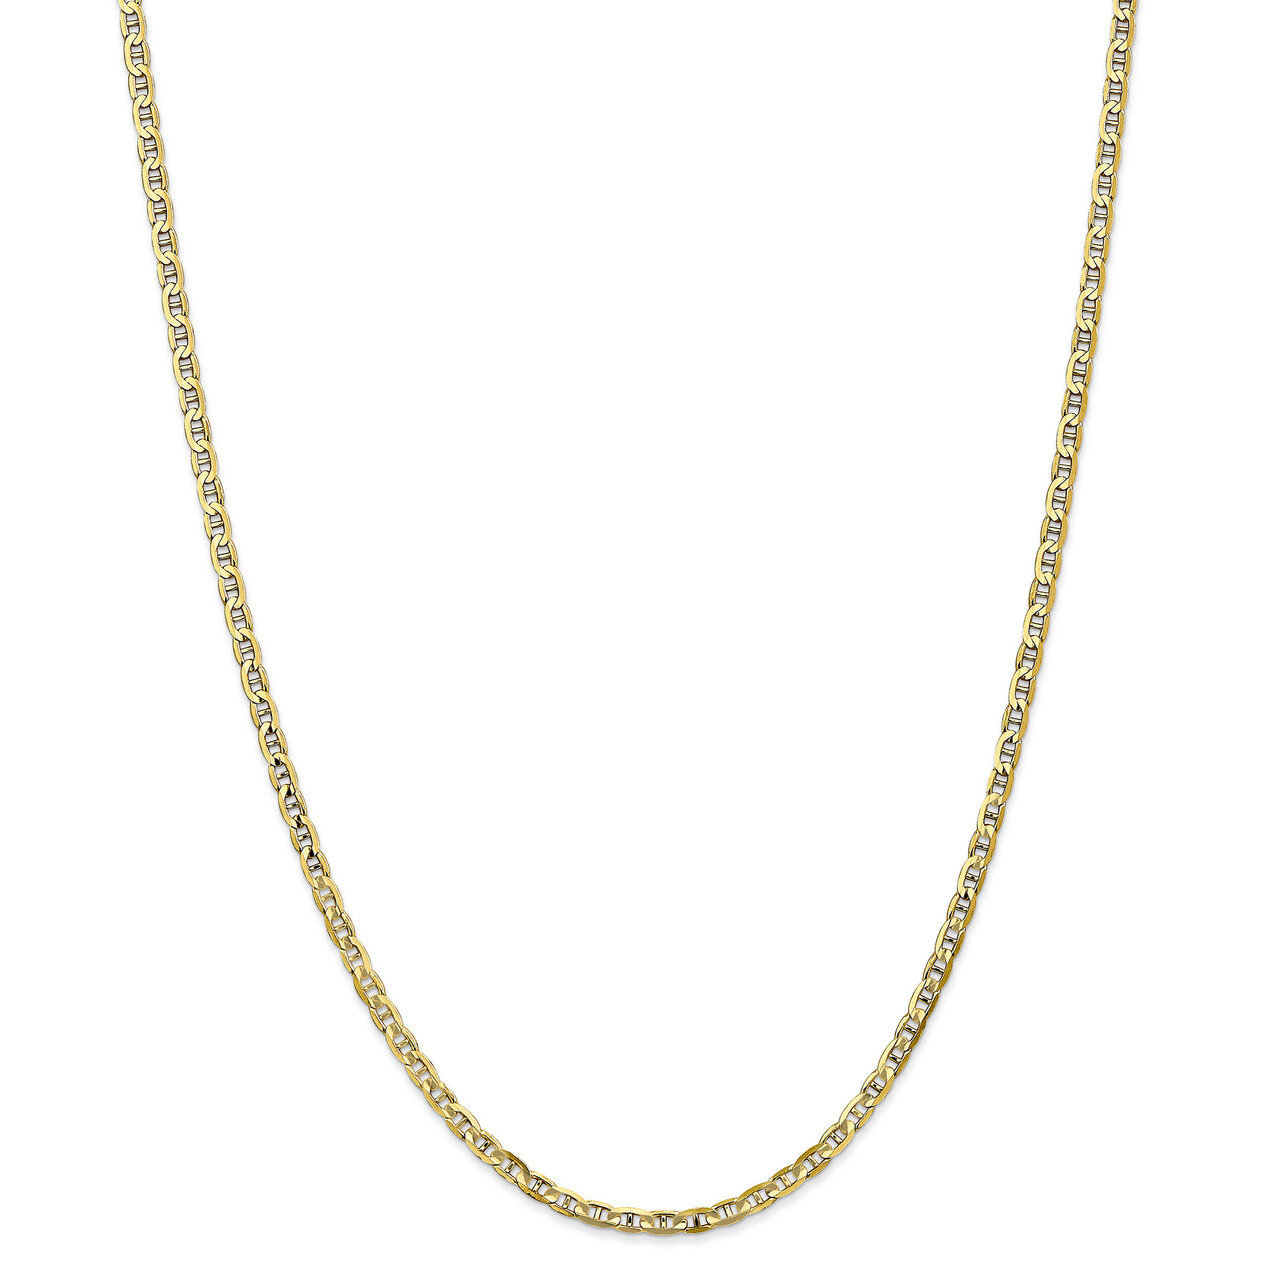 3mm Concave Anchor Chain 22 Inch 10k Gold HB-8220-22